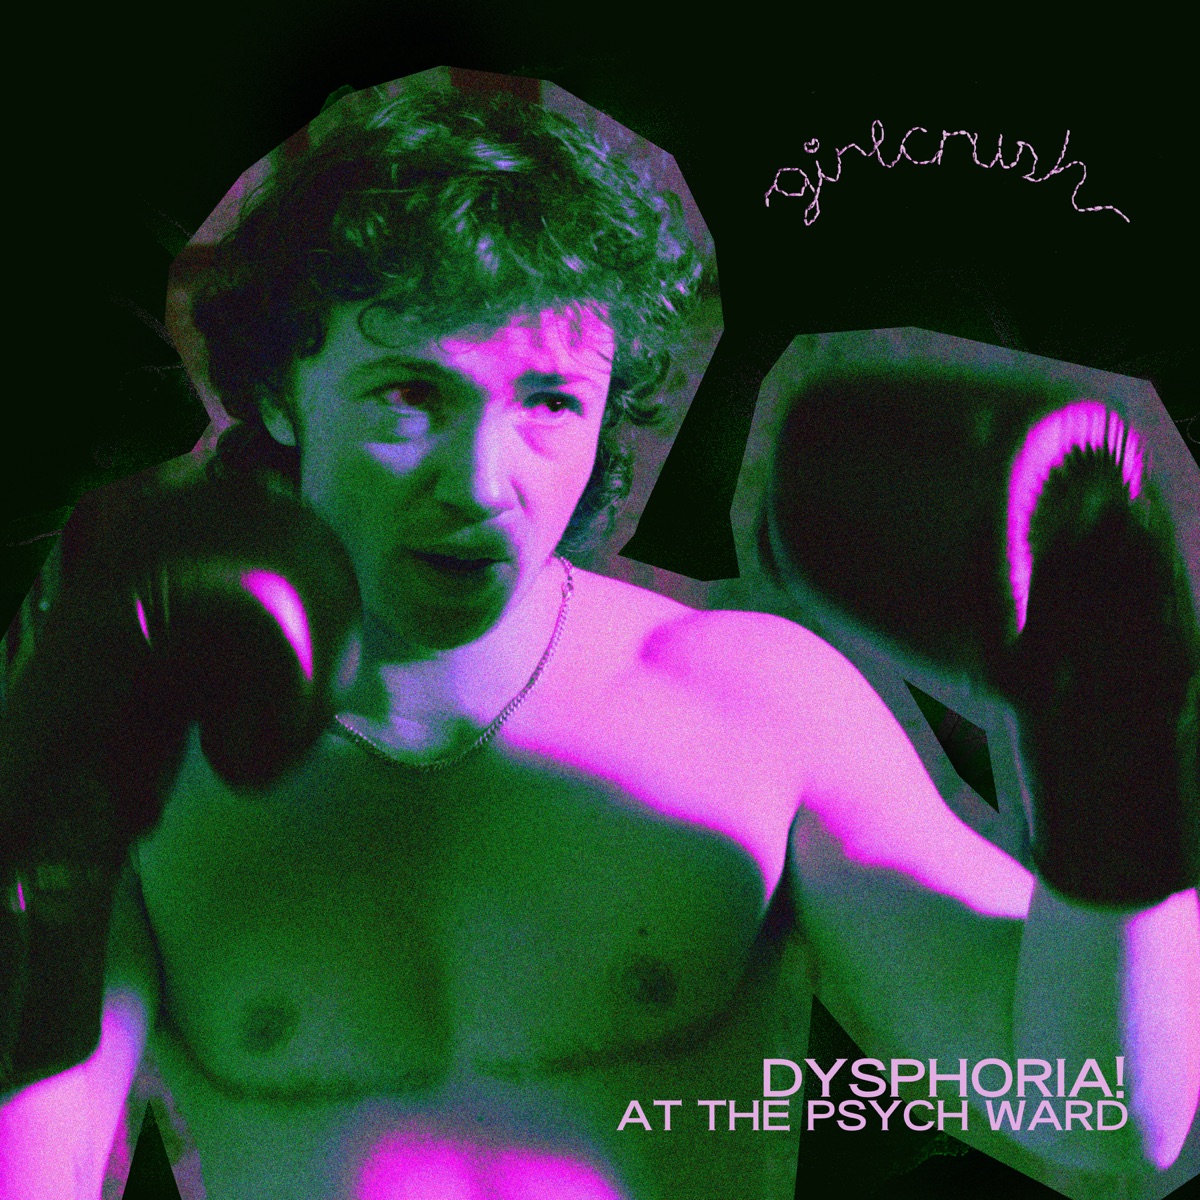 girlcrush - Dysphoria! at the psych ward - Single